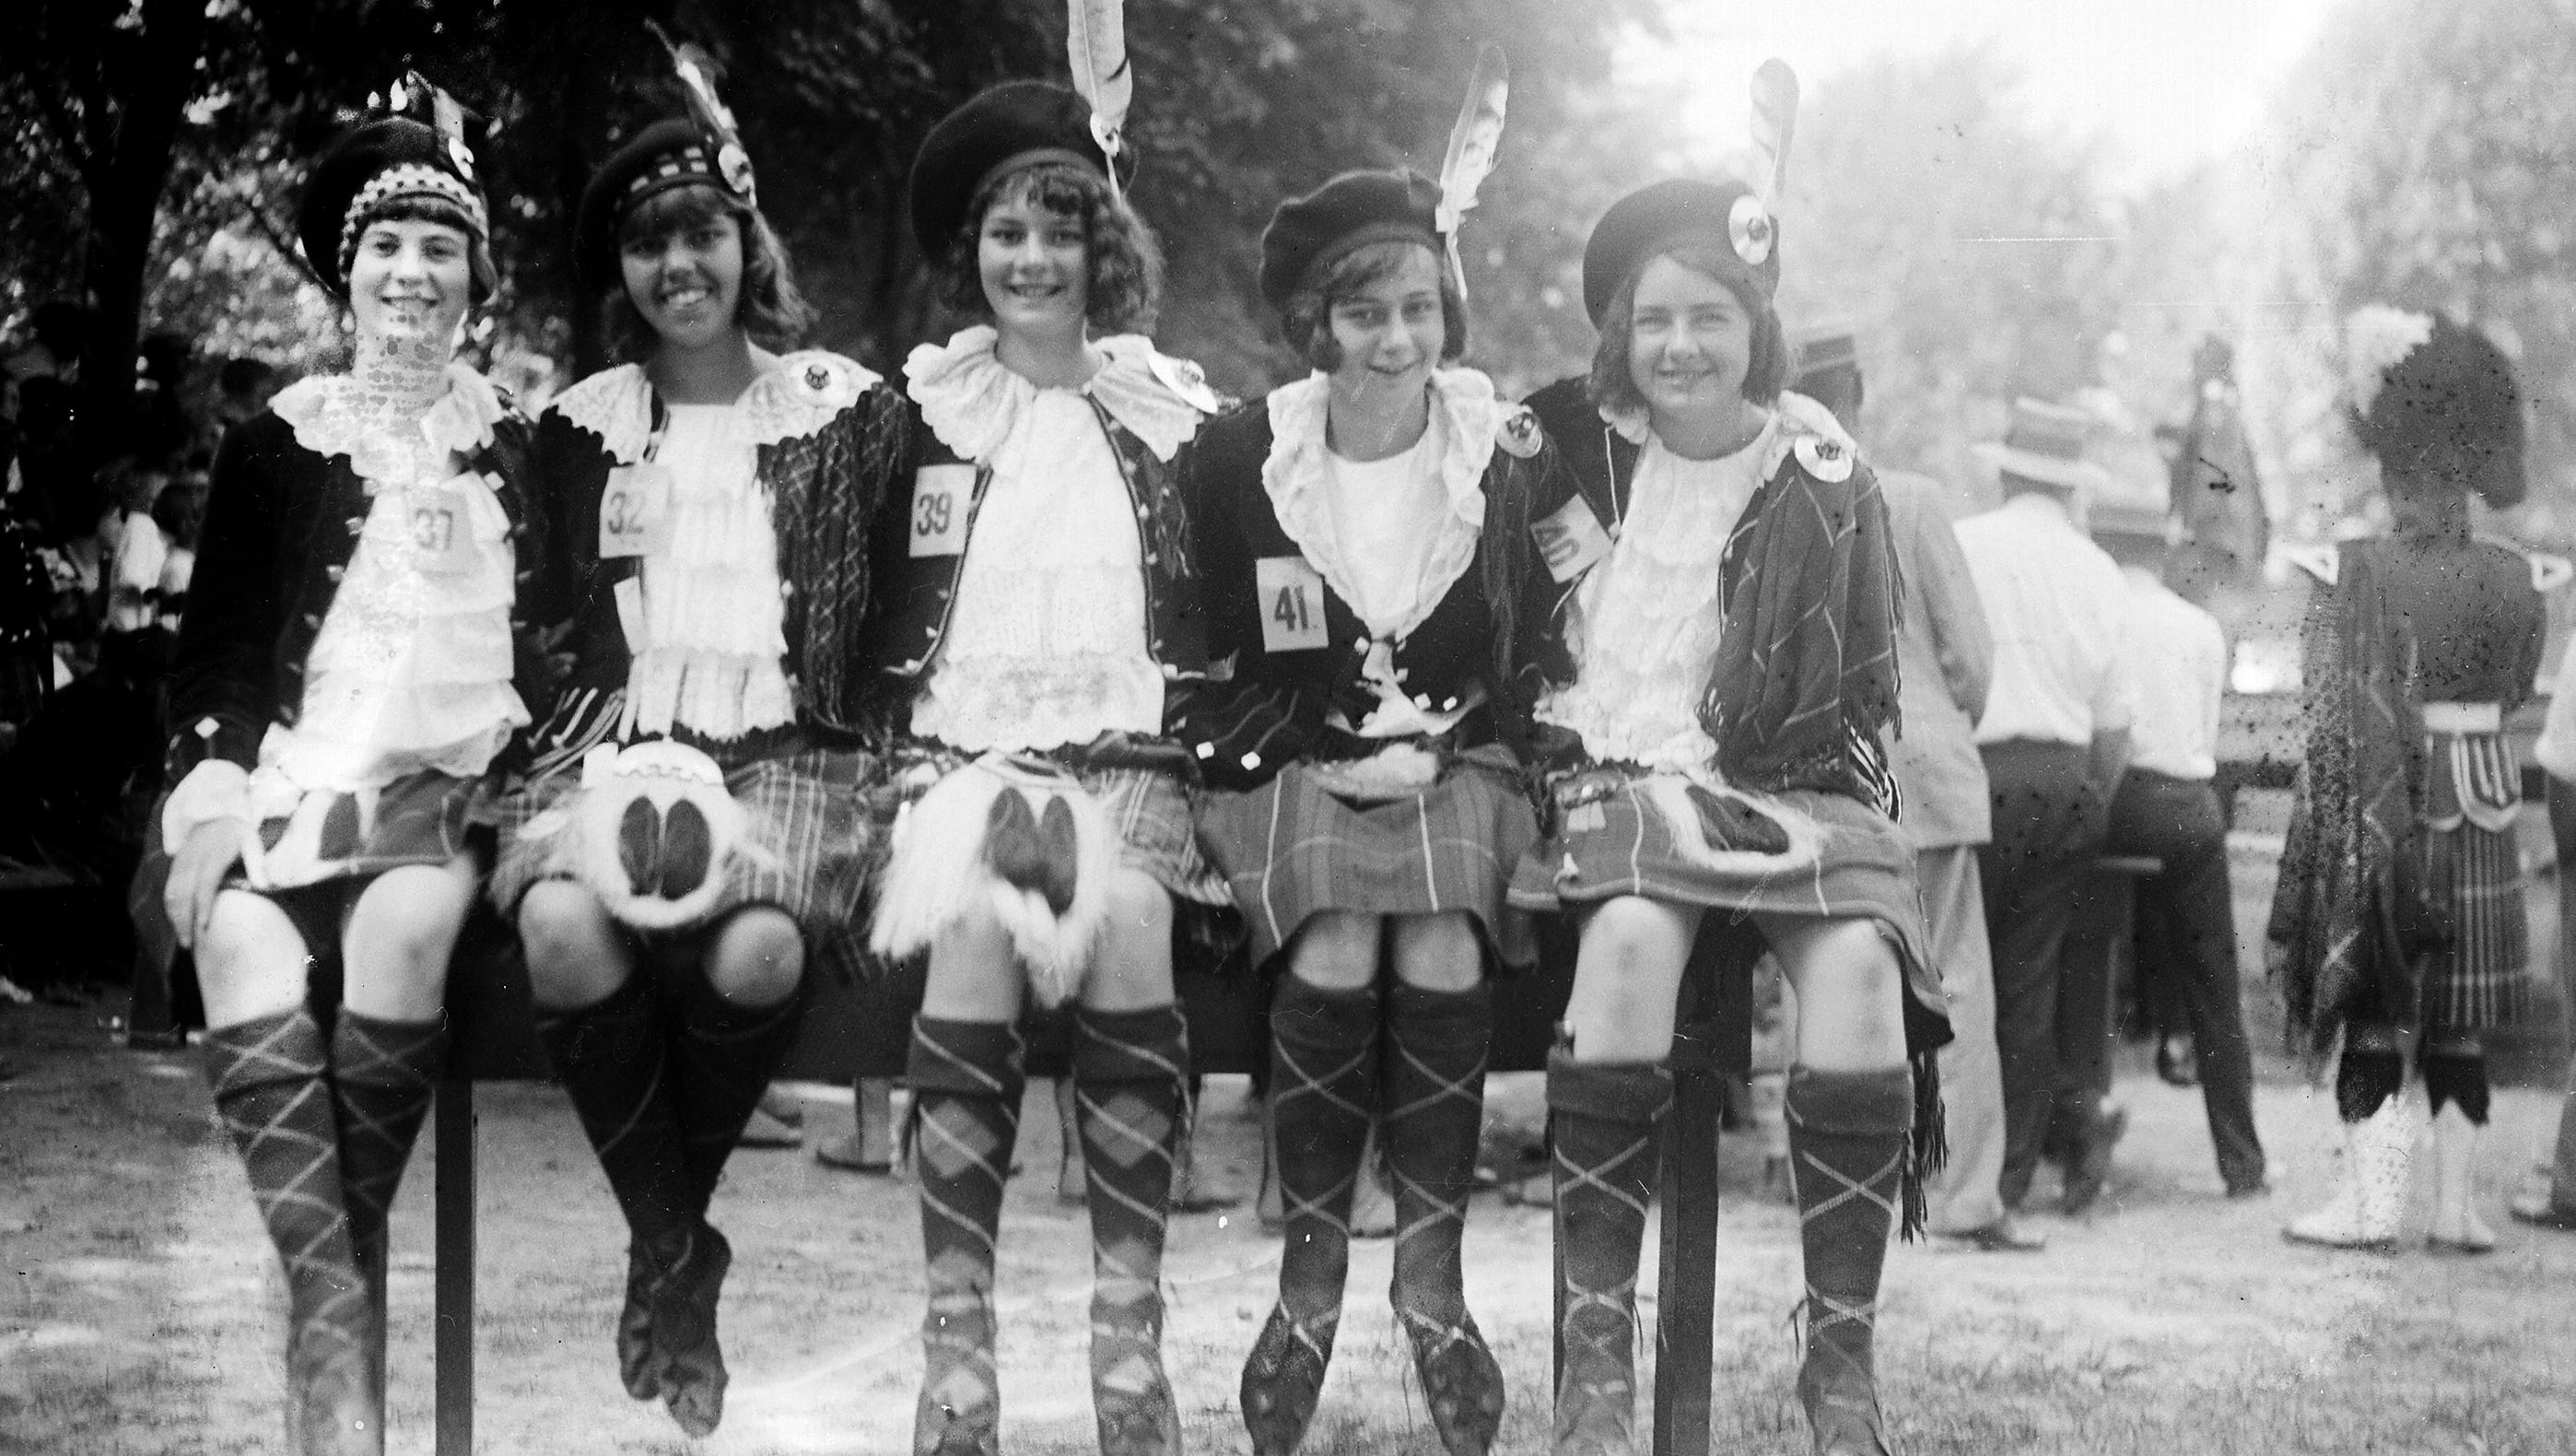 Some lasses in Scottish gear enjoy a St. Andrew's Society picnic on Boblo Island in the 1920s.